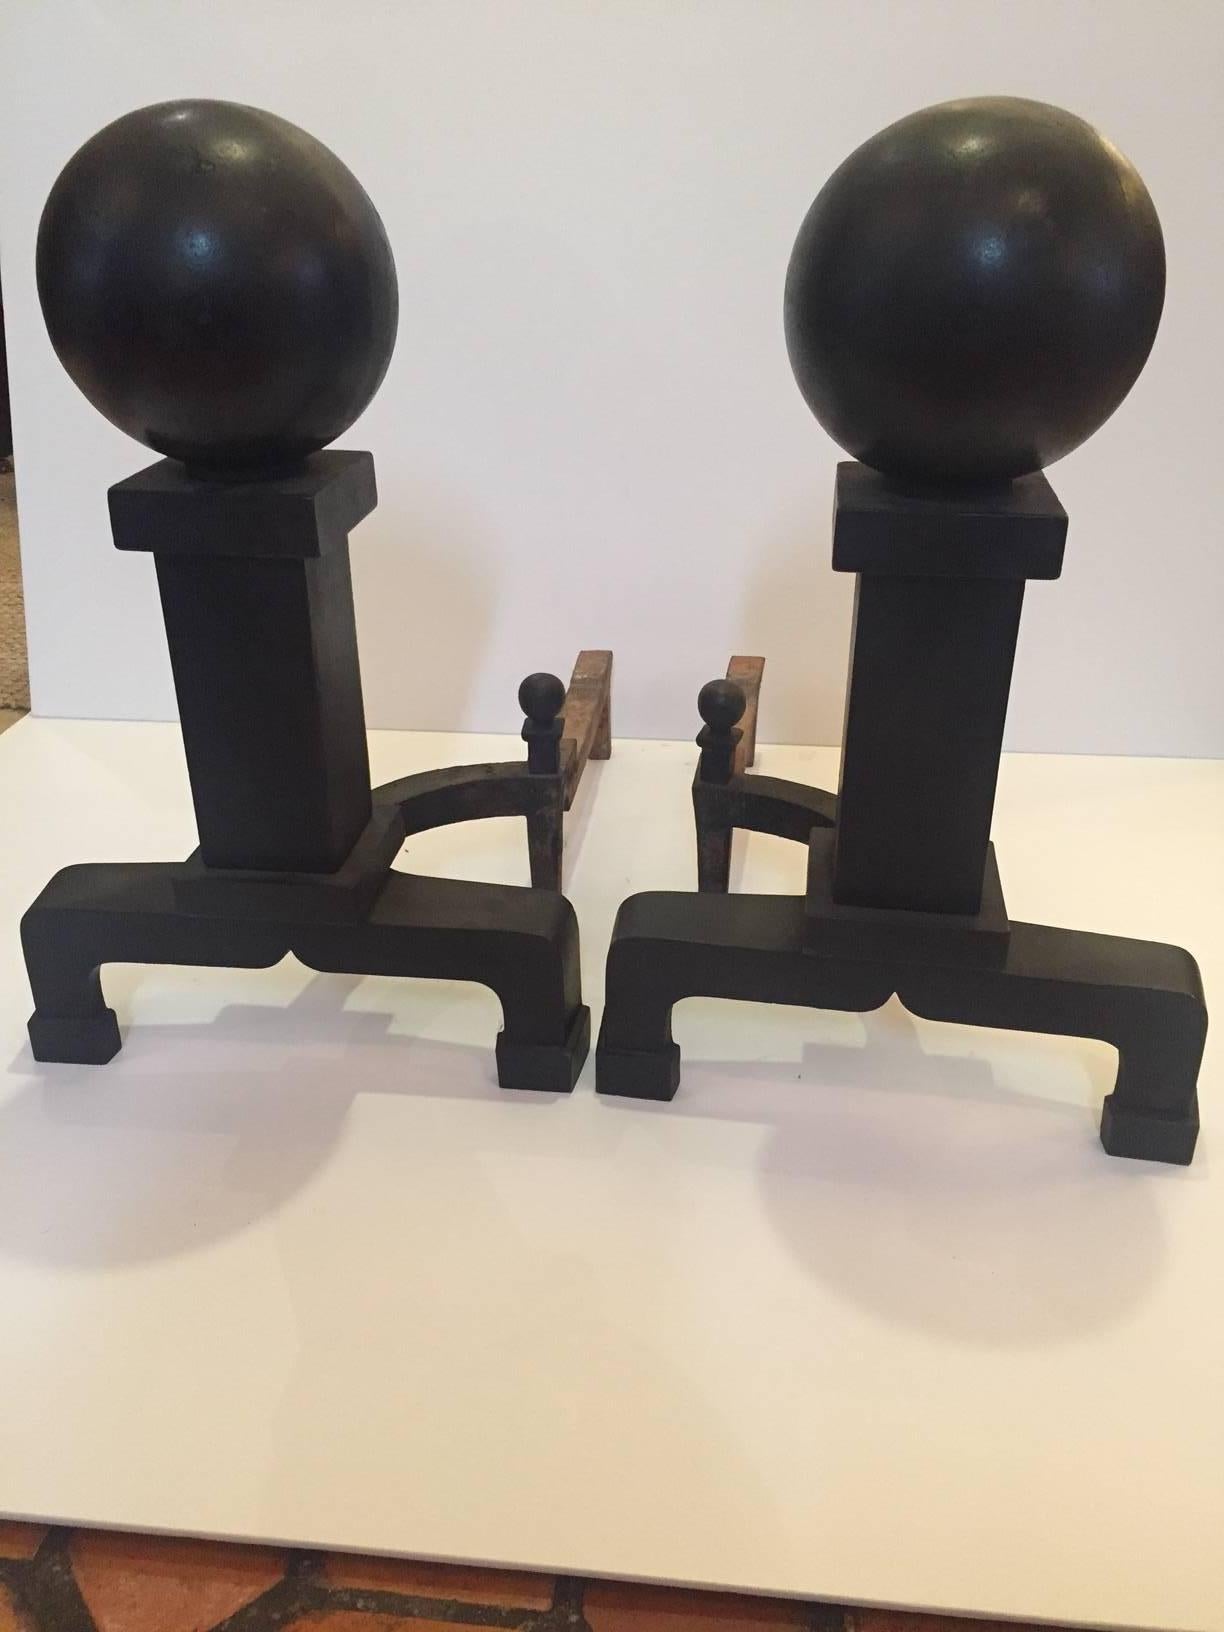 Monumental and Masculine Cannonball Iron Andirons 1